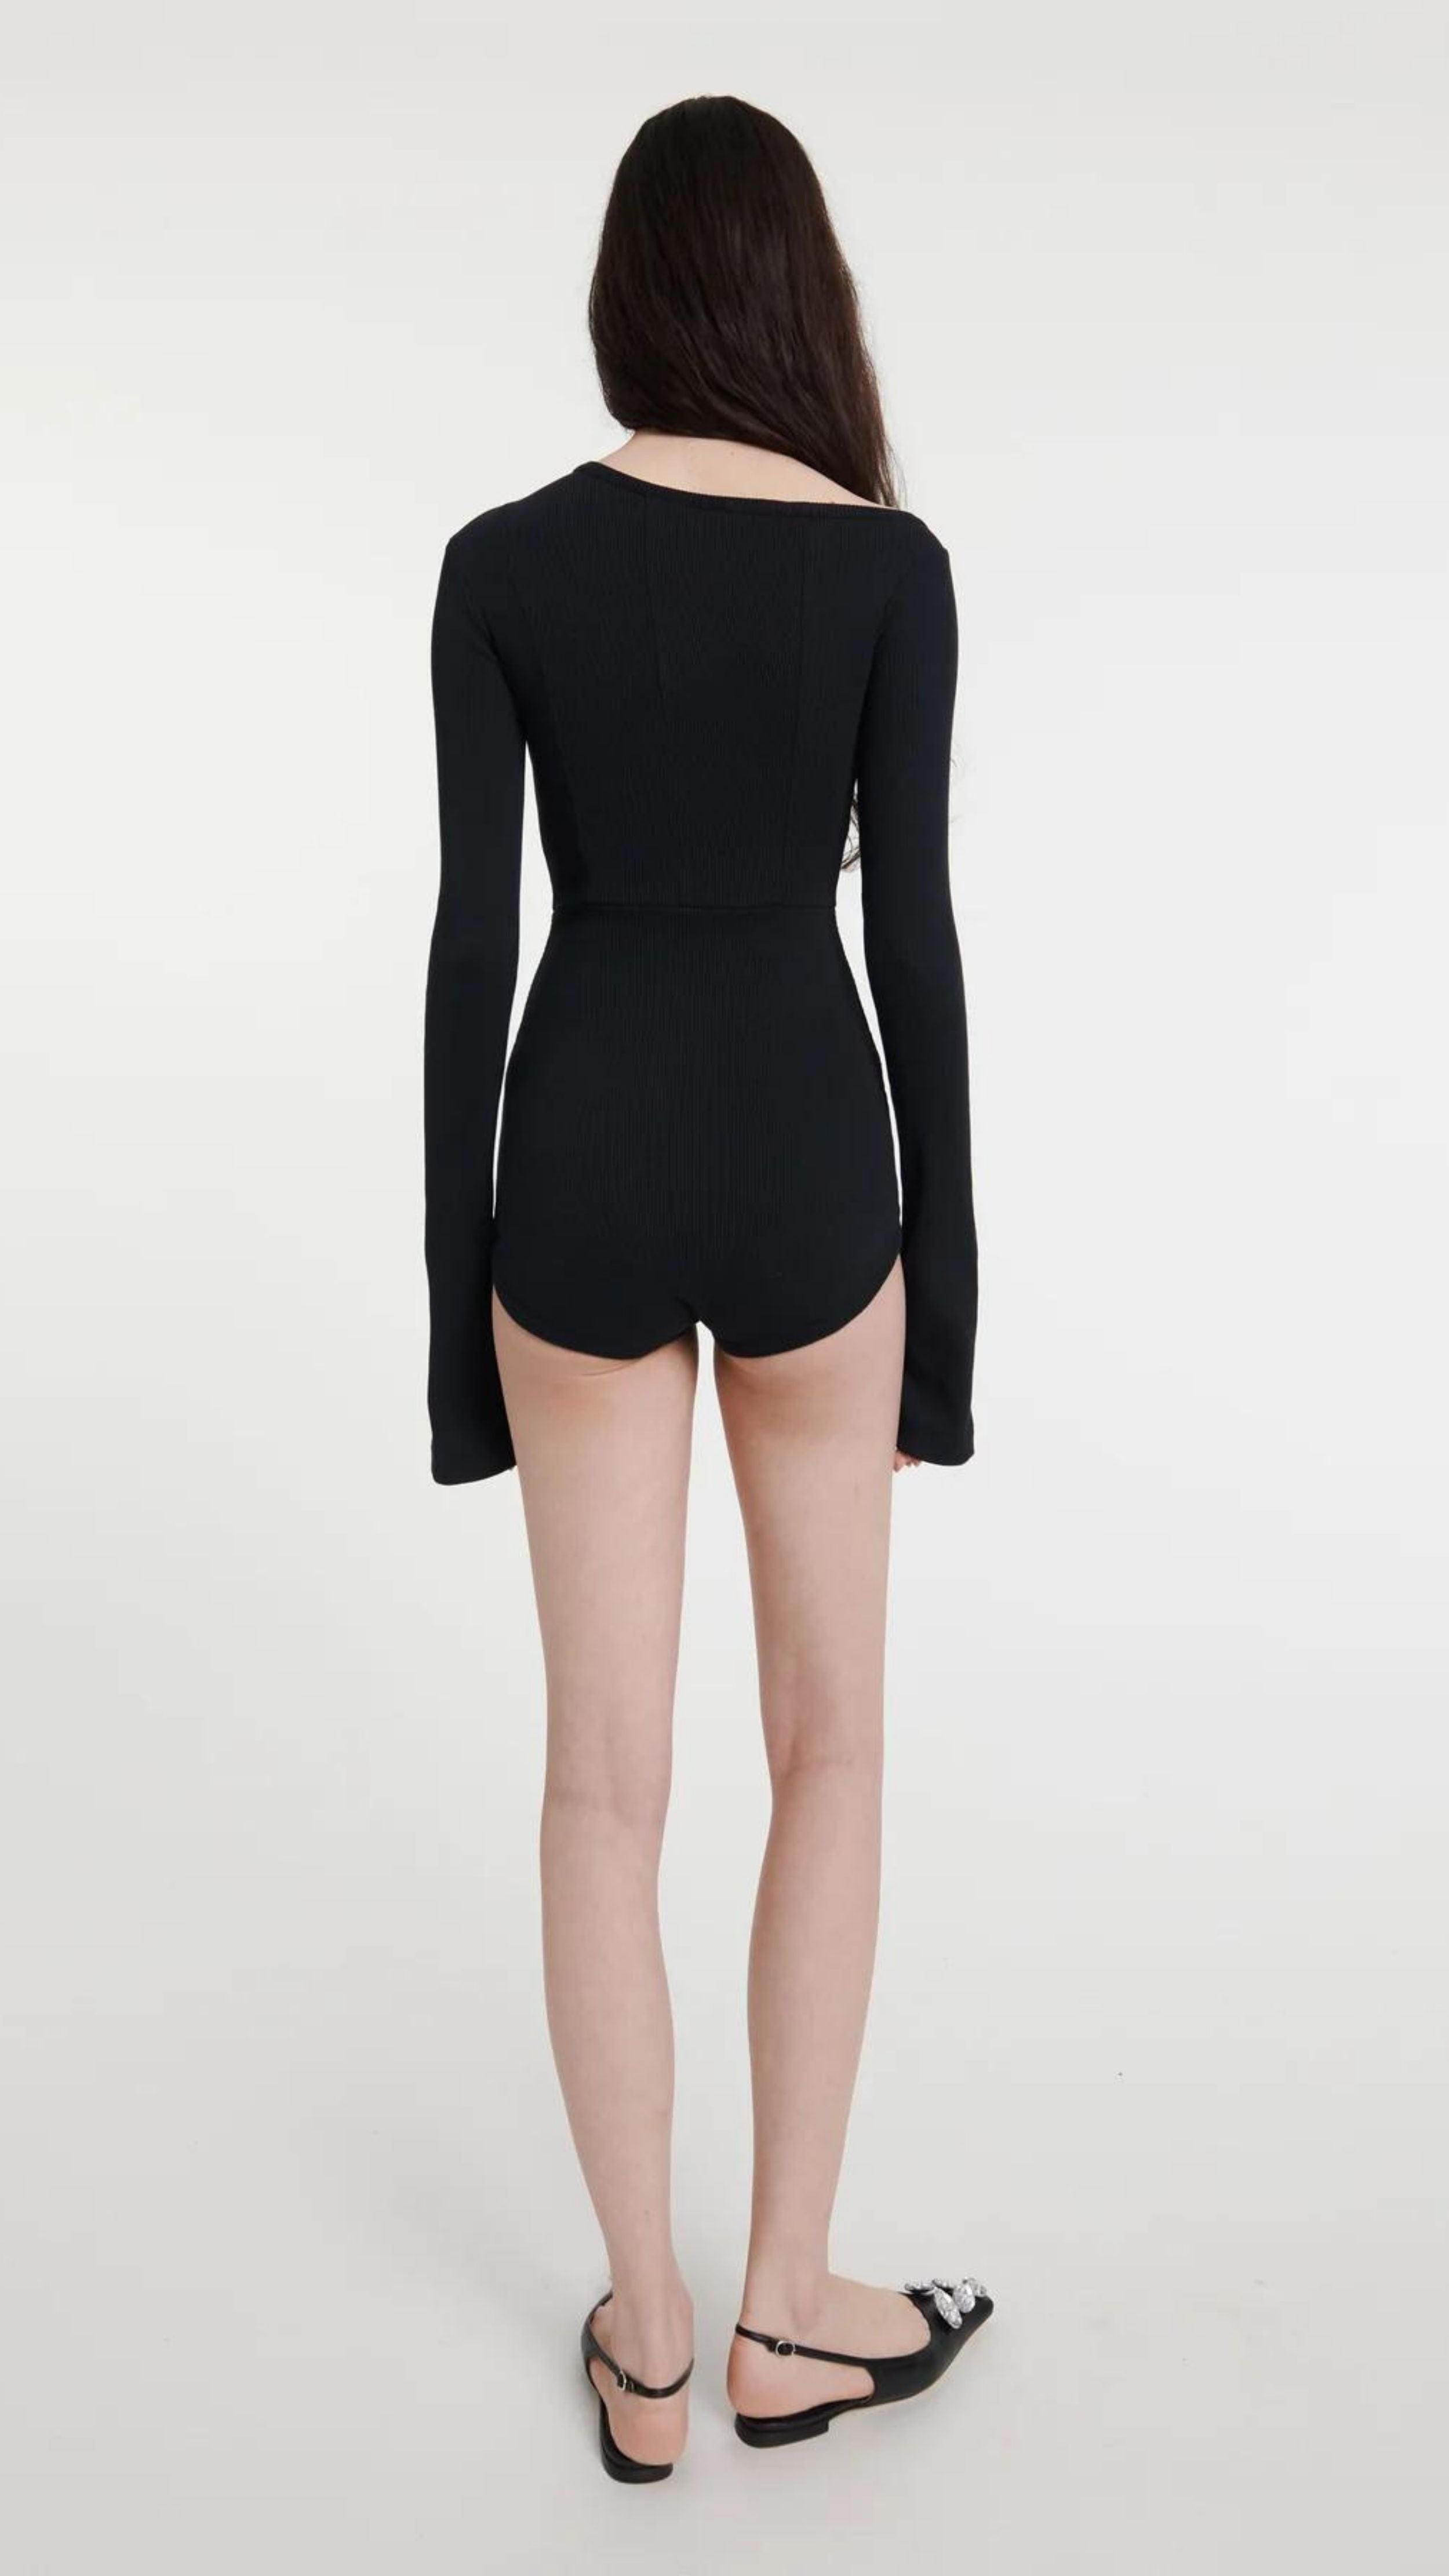 AWAKE Mode Body Suit with Asymmetrical Collar in Black. 100% Cotton top with an asymmetrical collar. Slightly off shoulder on one side. Buttons up the front and extra long sleeves. Shown on model facing back.